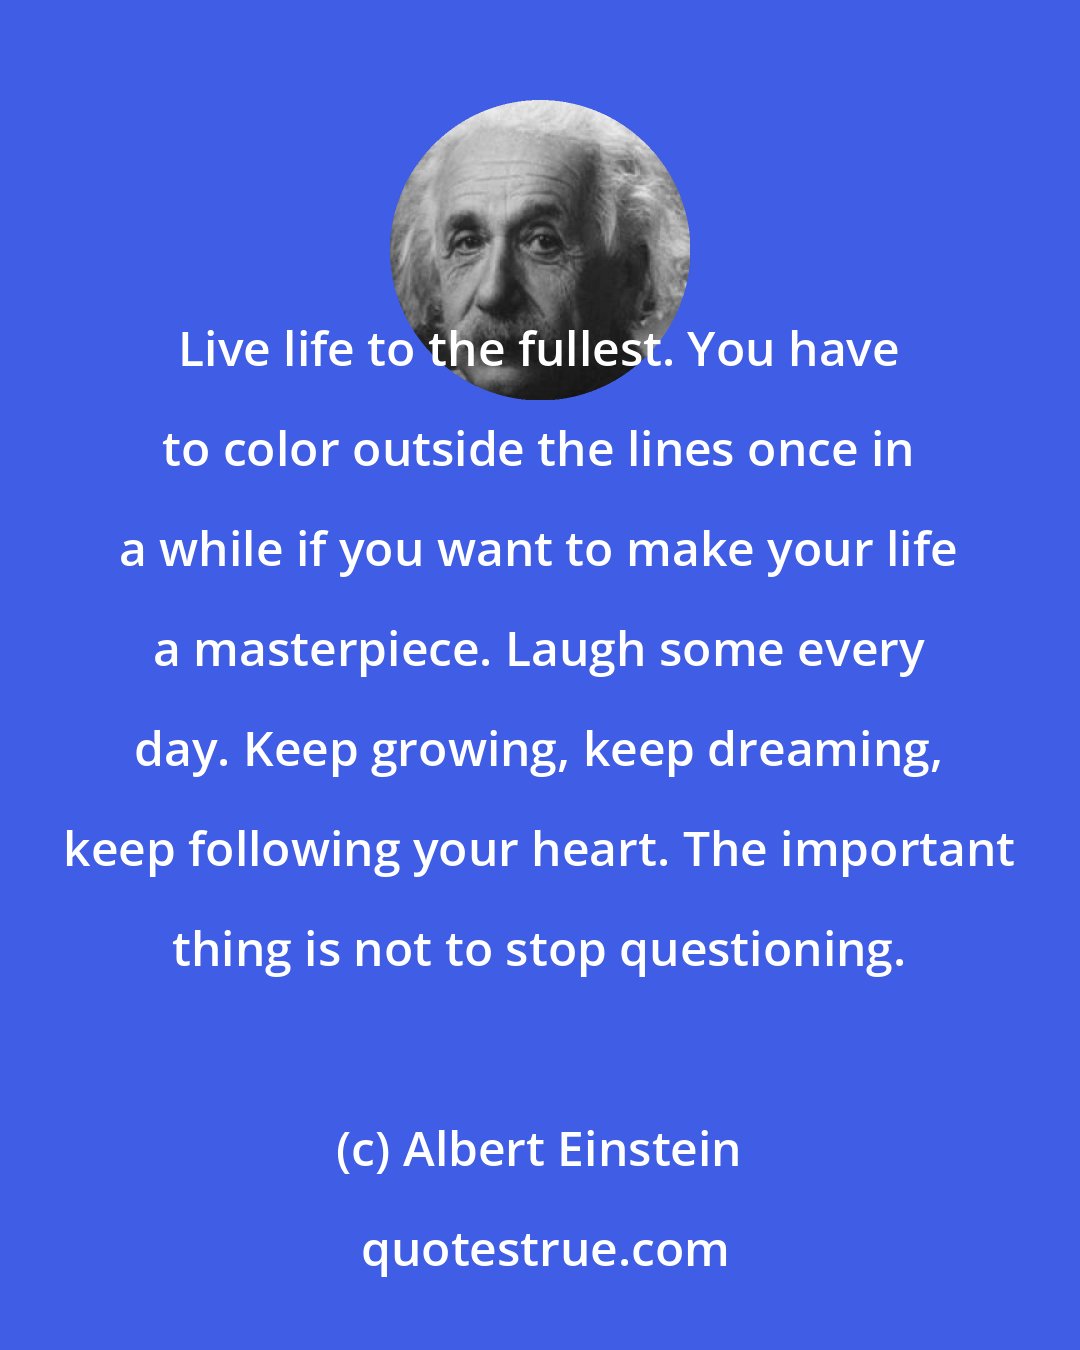 Albert Einstein: Live life to the fullest. You have to color outside the lines once in a while if you want to make your life a masterpiece. Laugh some every day. Keep growing, keep dreaming, keep following your heart. The important thing is not to stop questioning.